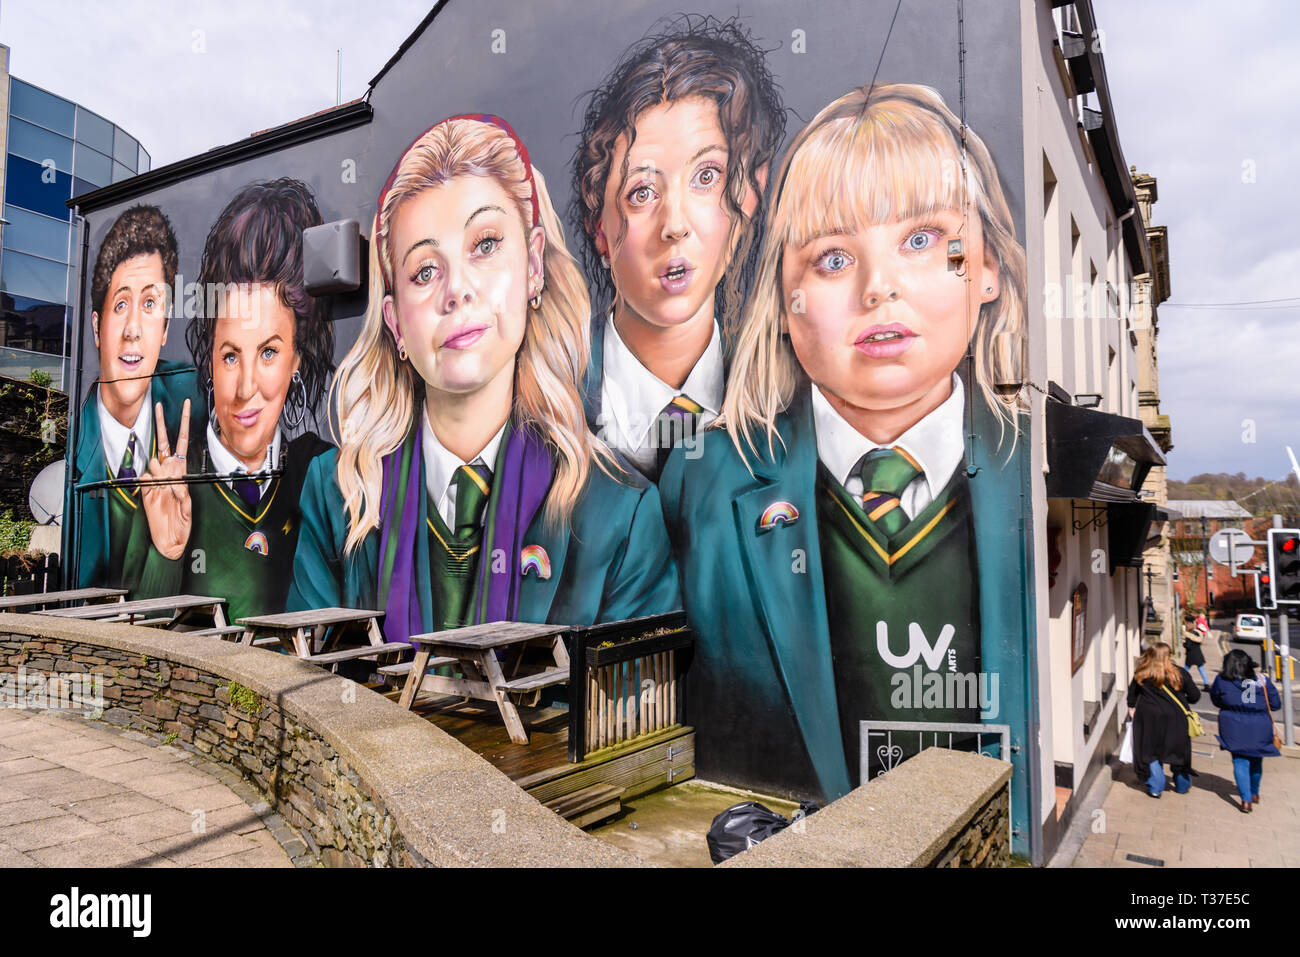 Mural featuring the main characters from the Channel 4 television series 'Derry Girls' on the wall of the Badger Pub, Derry, Londonderry, Northern Ire Stock Photo